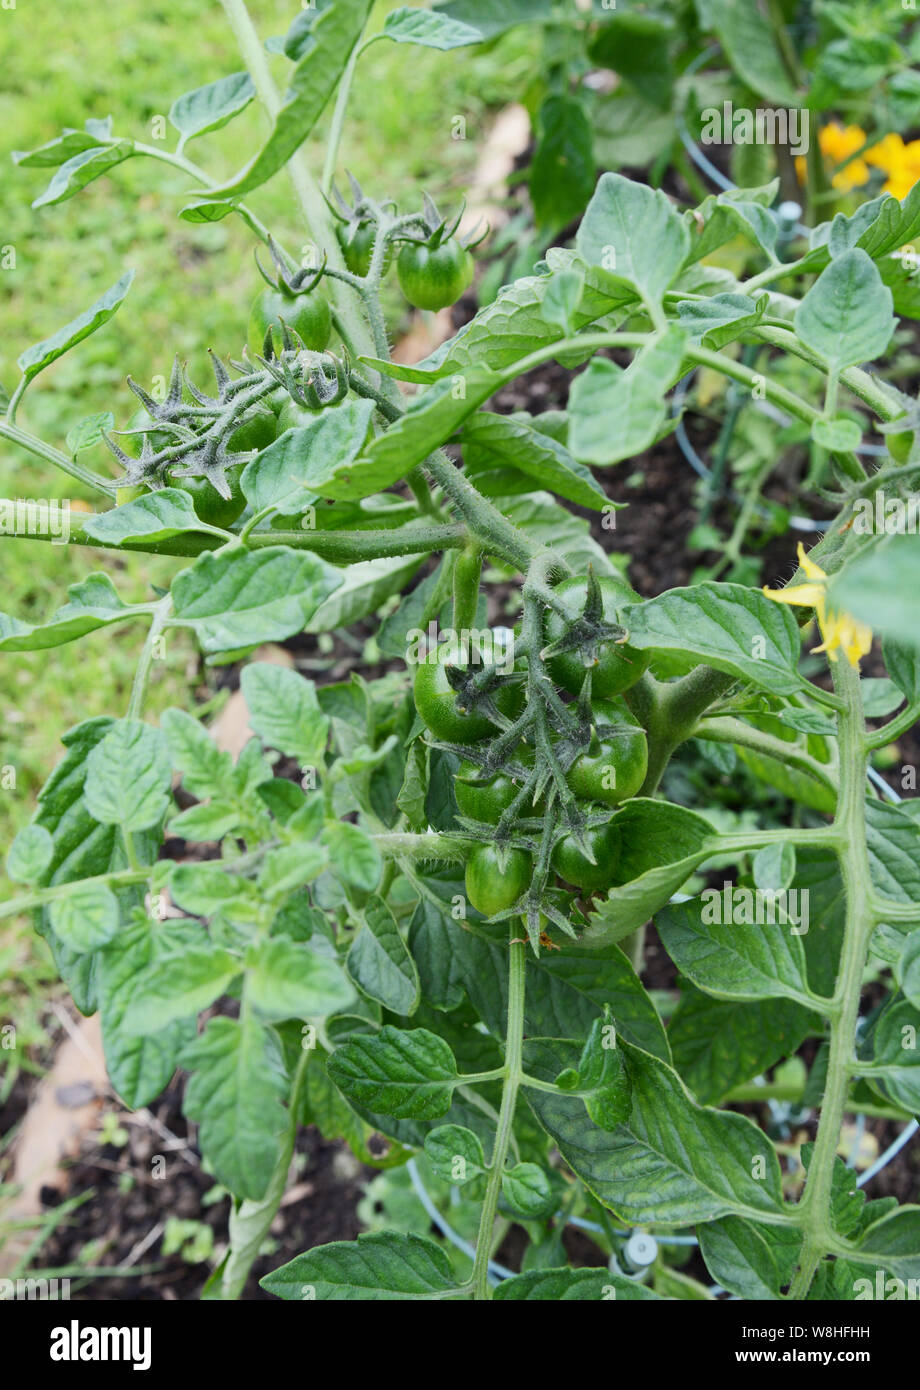 Dark green tomatoes growing on a cherry tomato plant in a vegetable bed Stock Photo